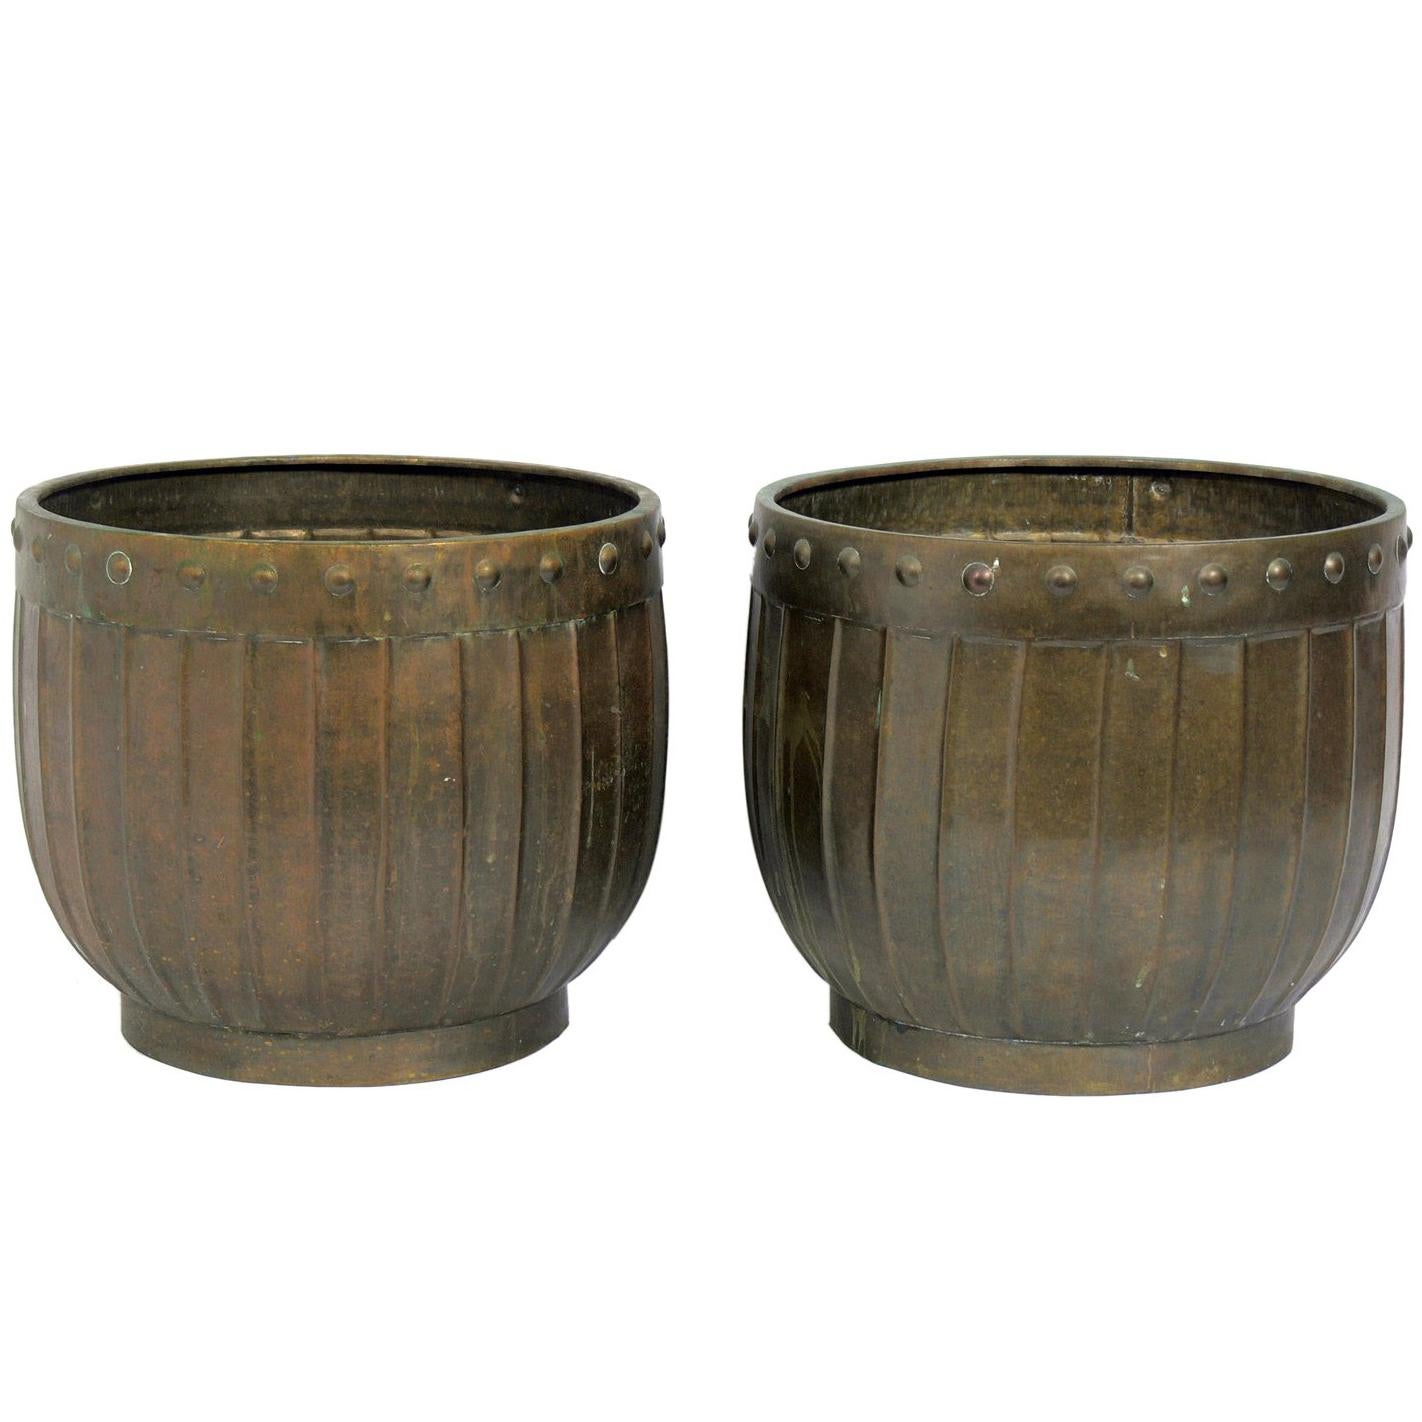 Pair of Patinated Brass Planters